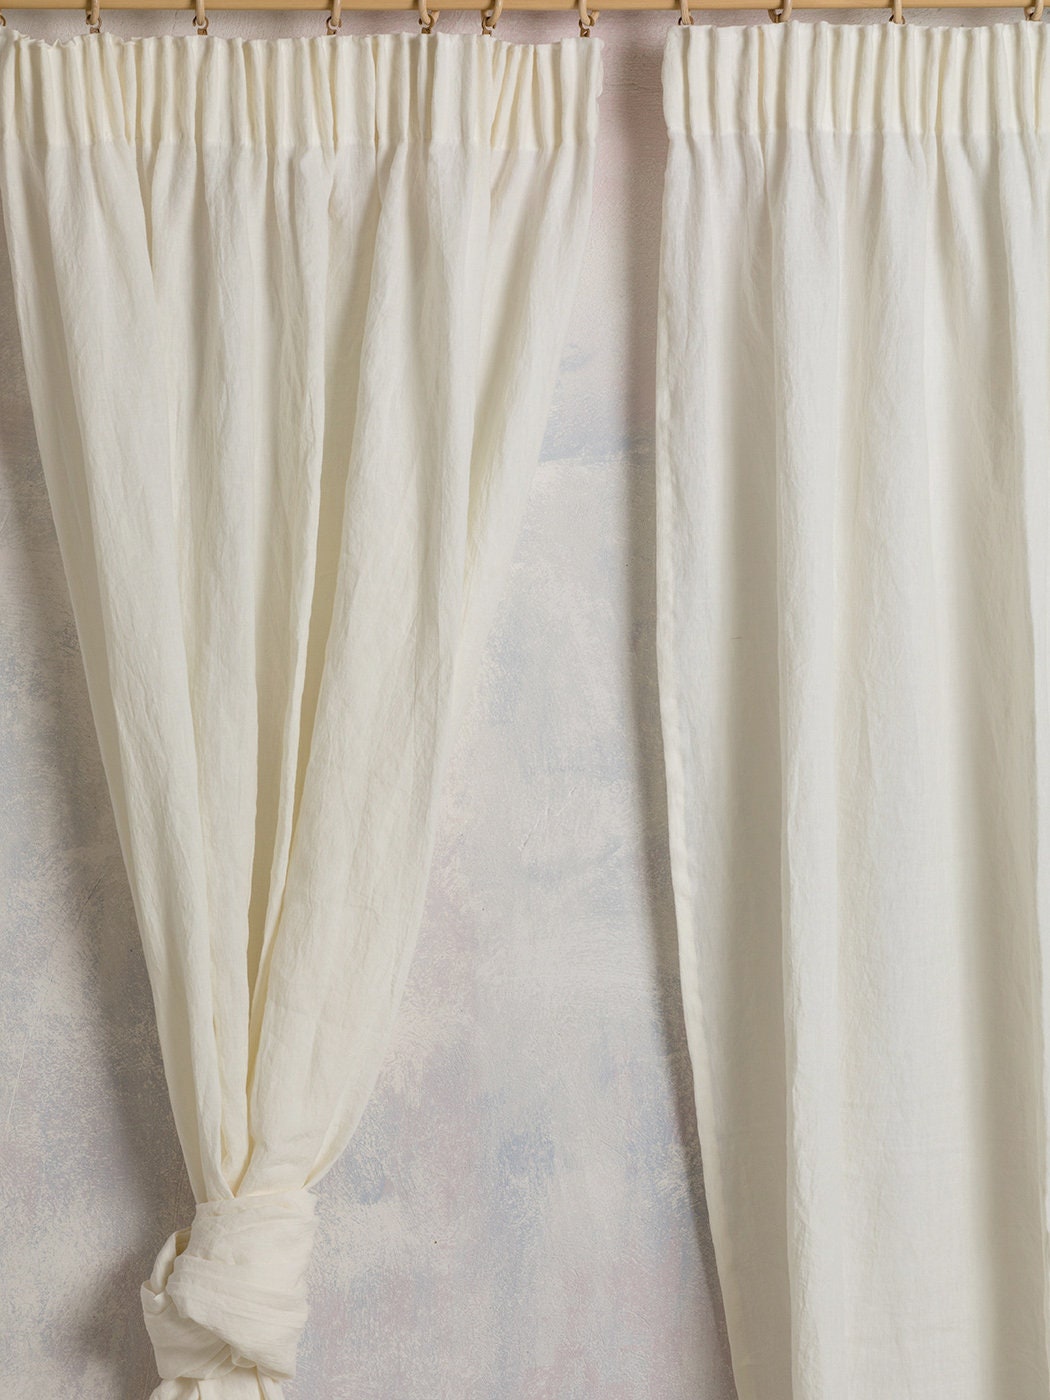 Linen Curtain Panel-Linen Panel in off white color Washed | Etsy